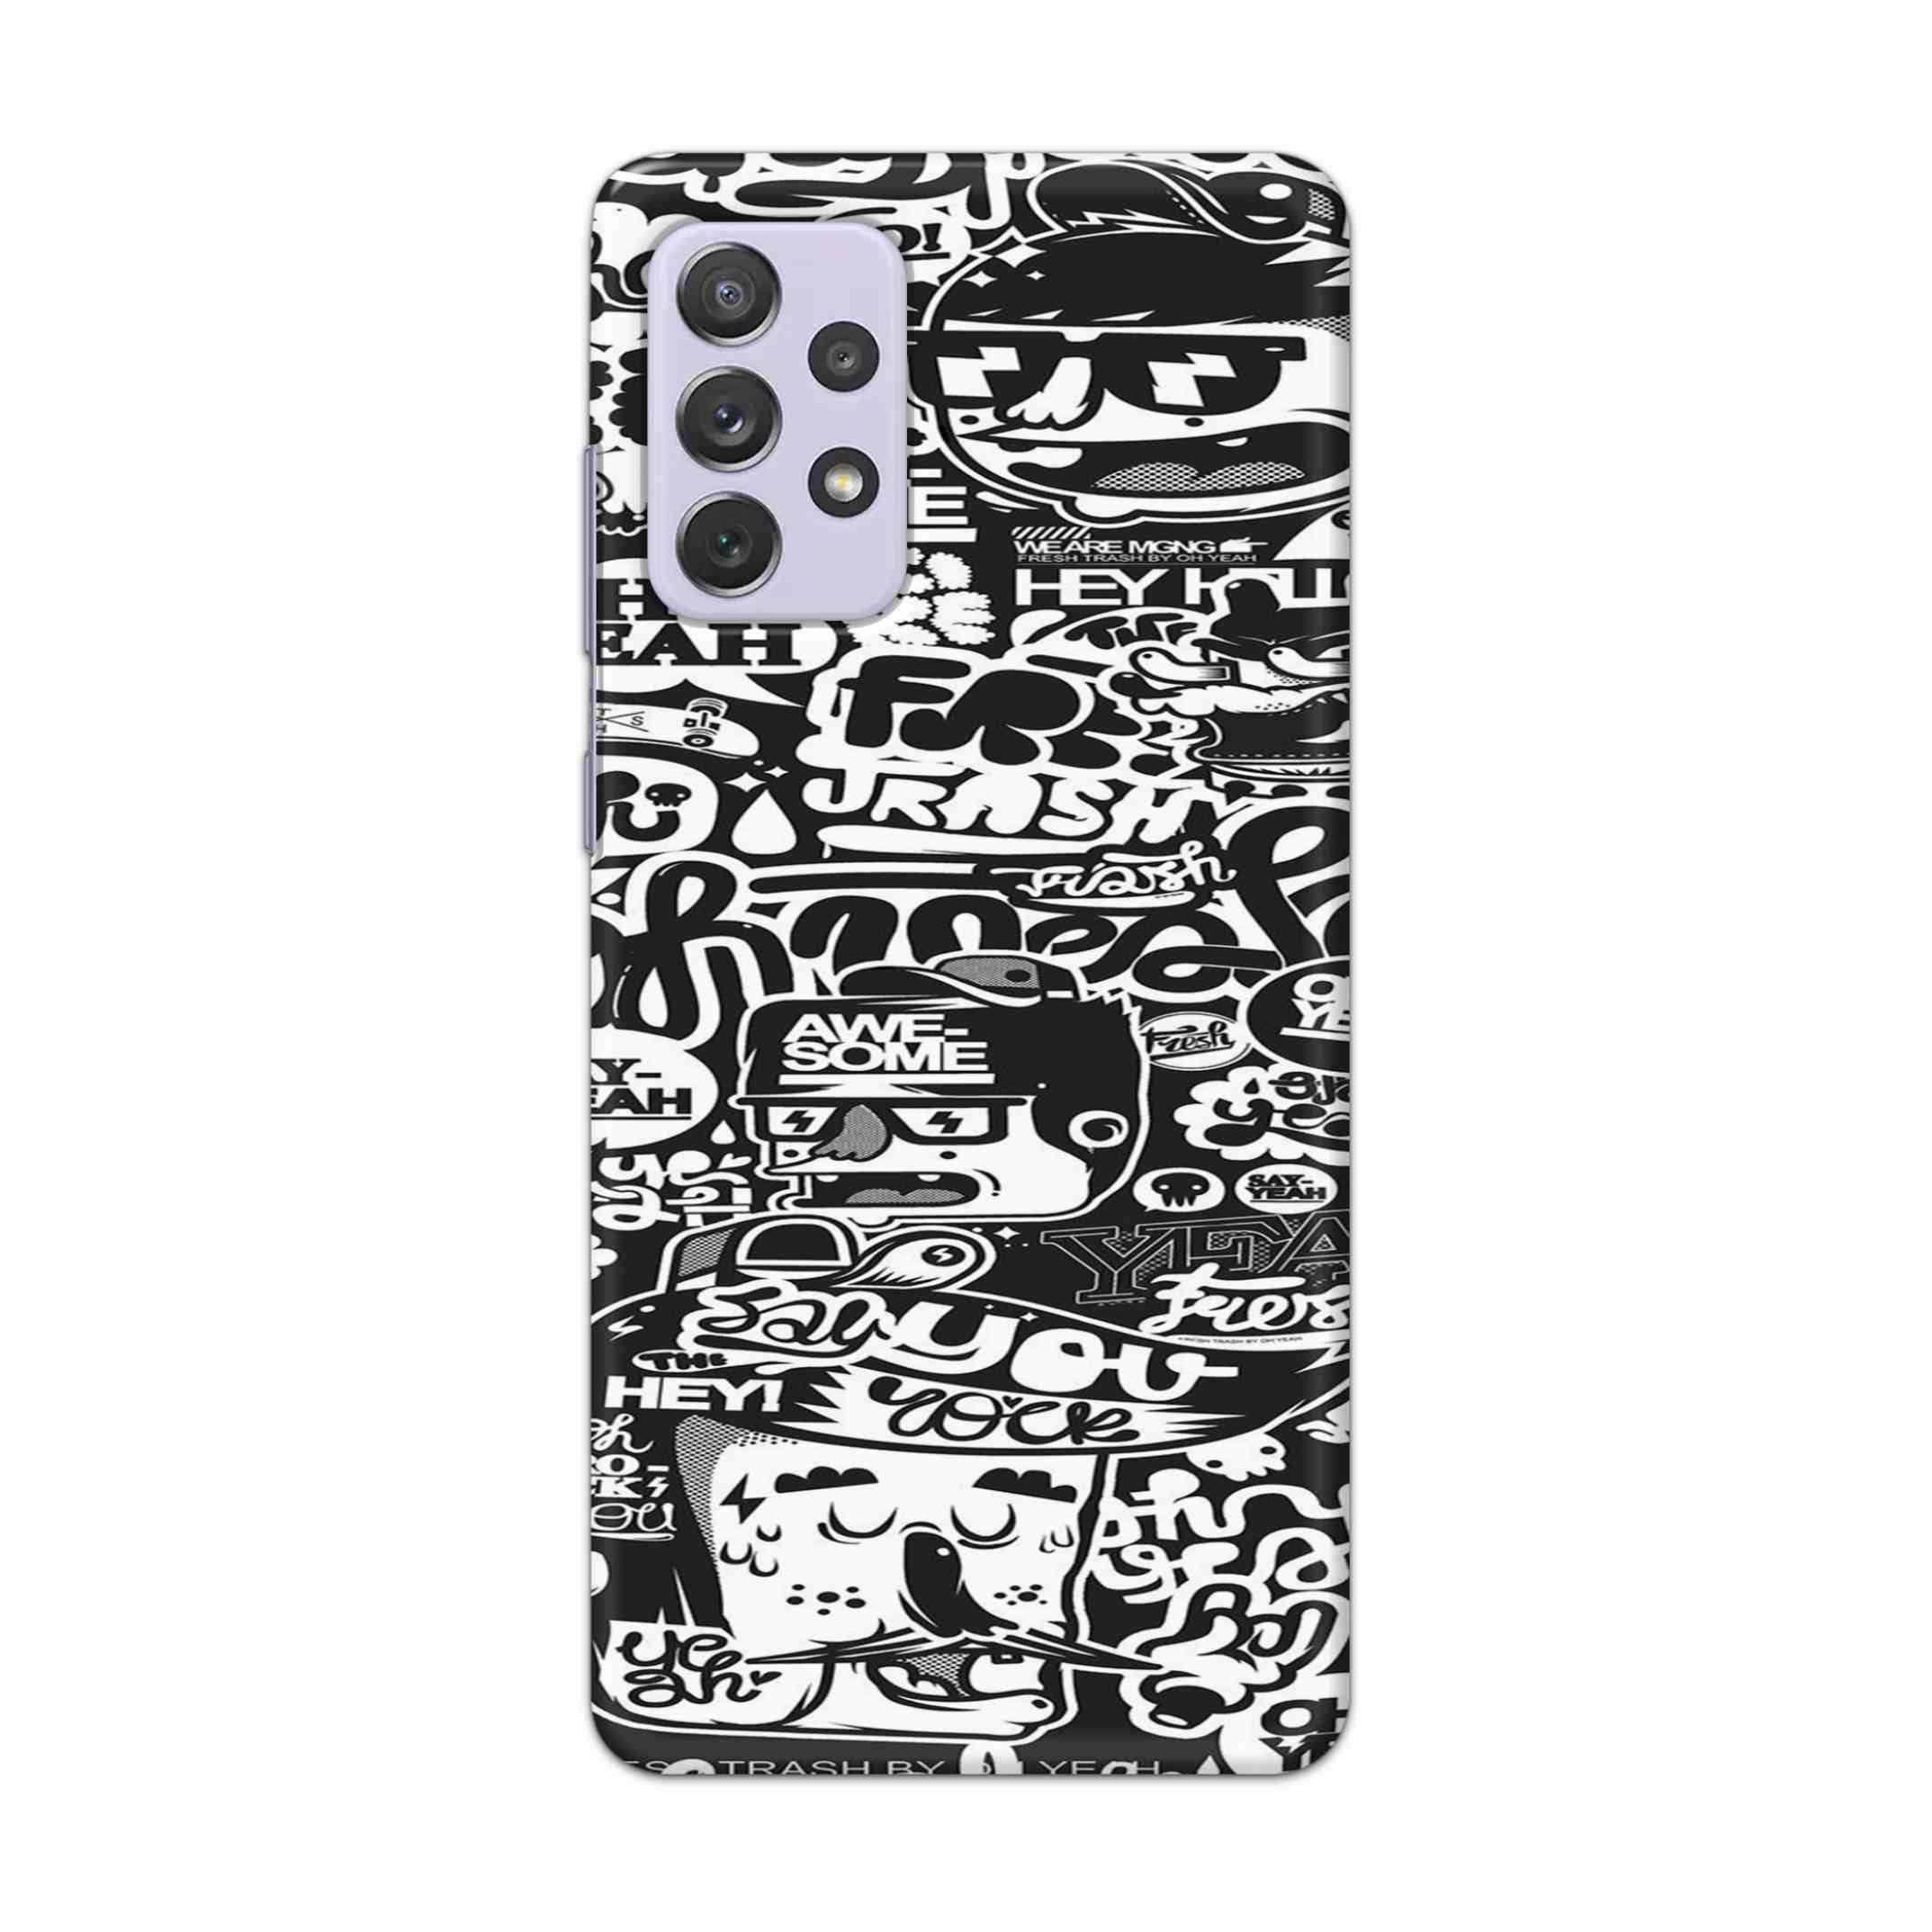 Buy Awesome Hard Back Mobile Phone Case Cover For Samsung Galaxy A72 Online